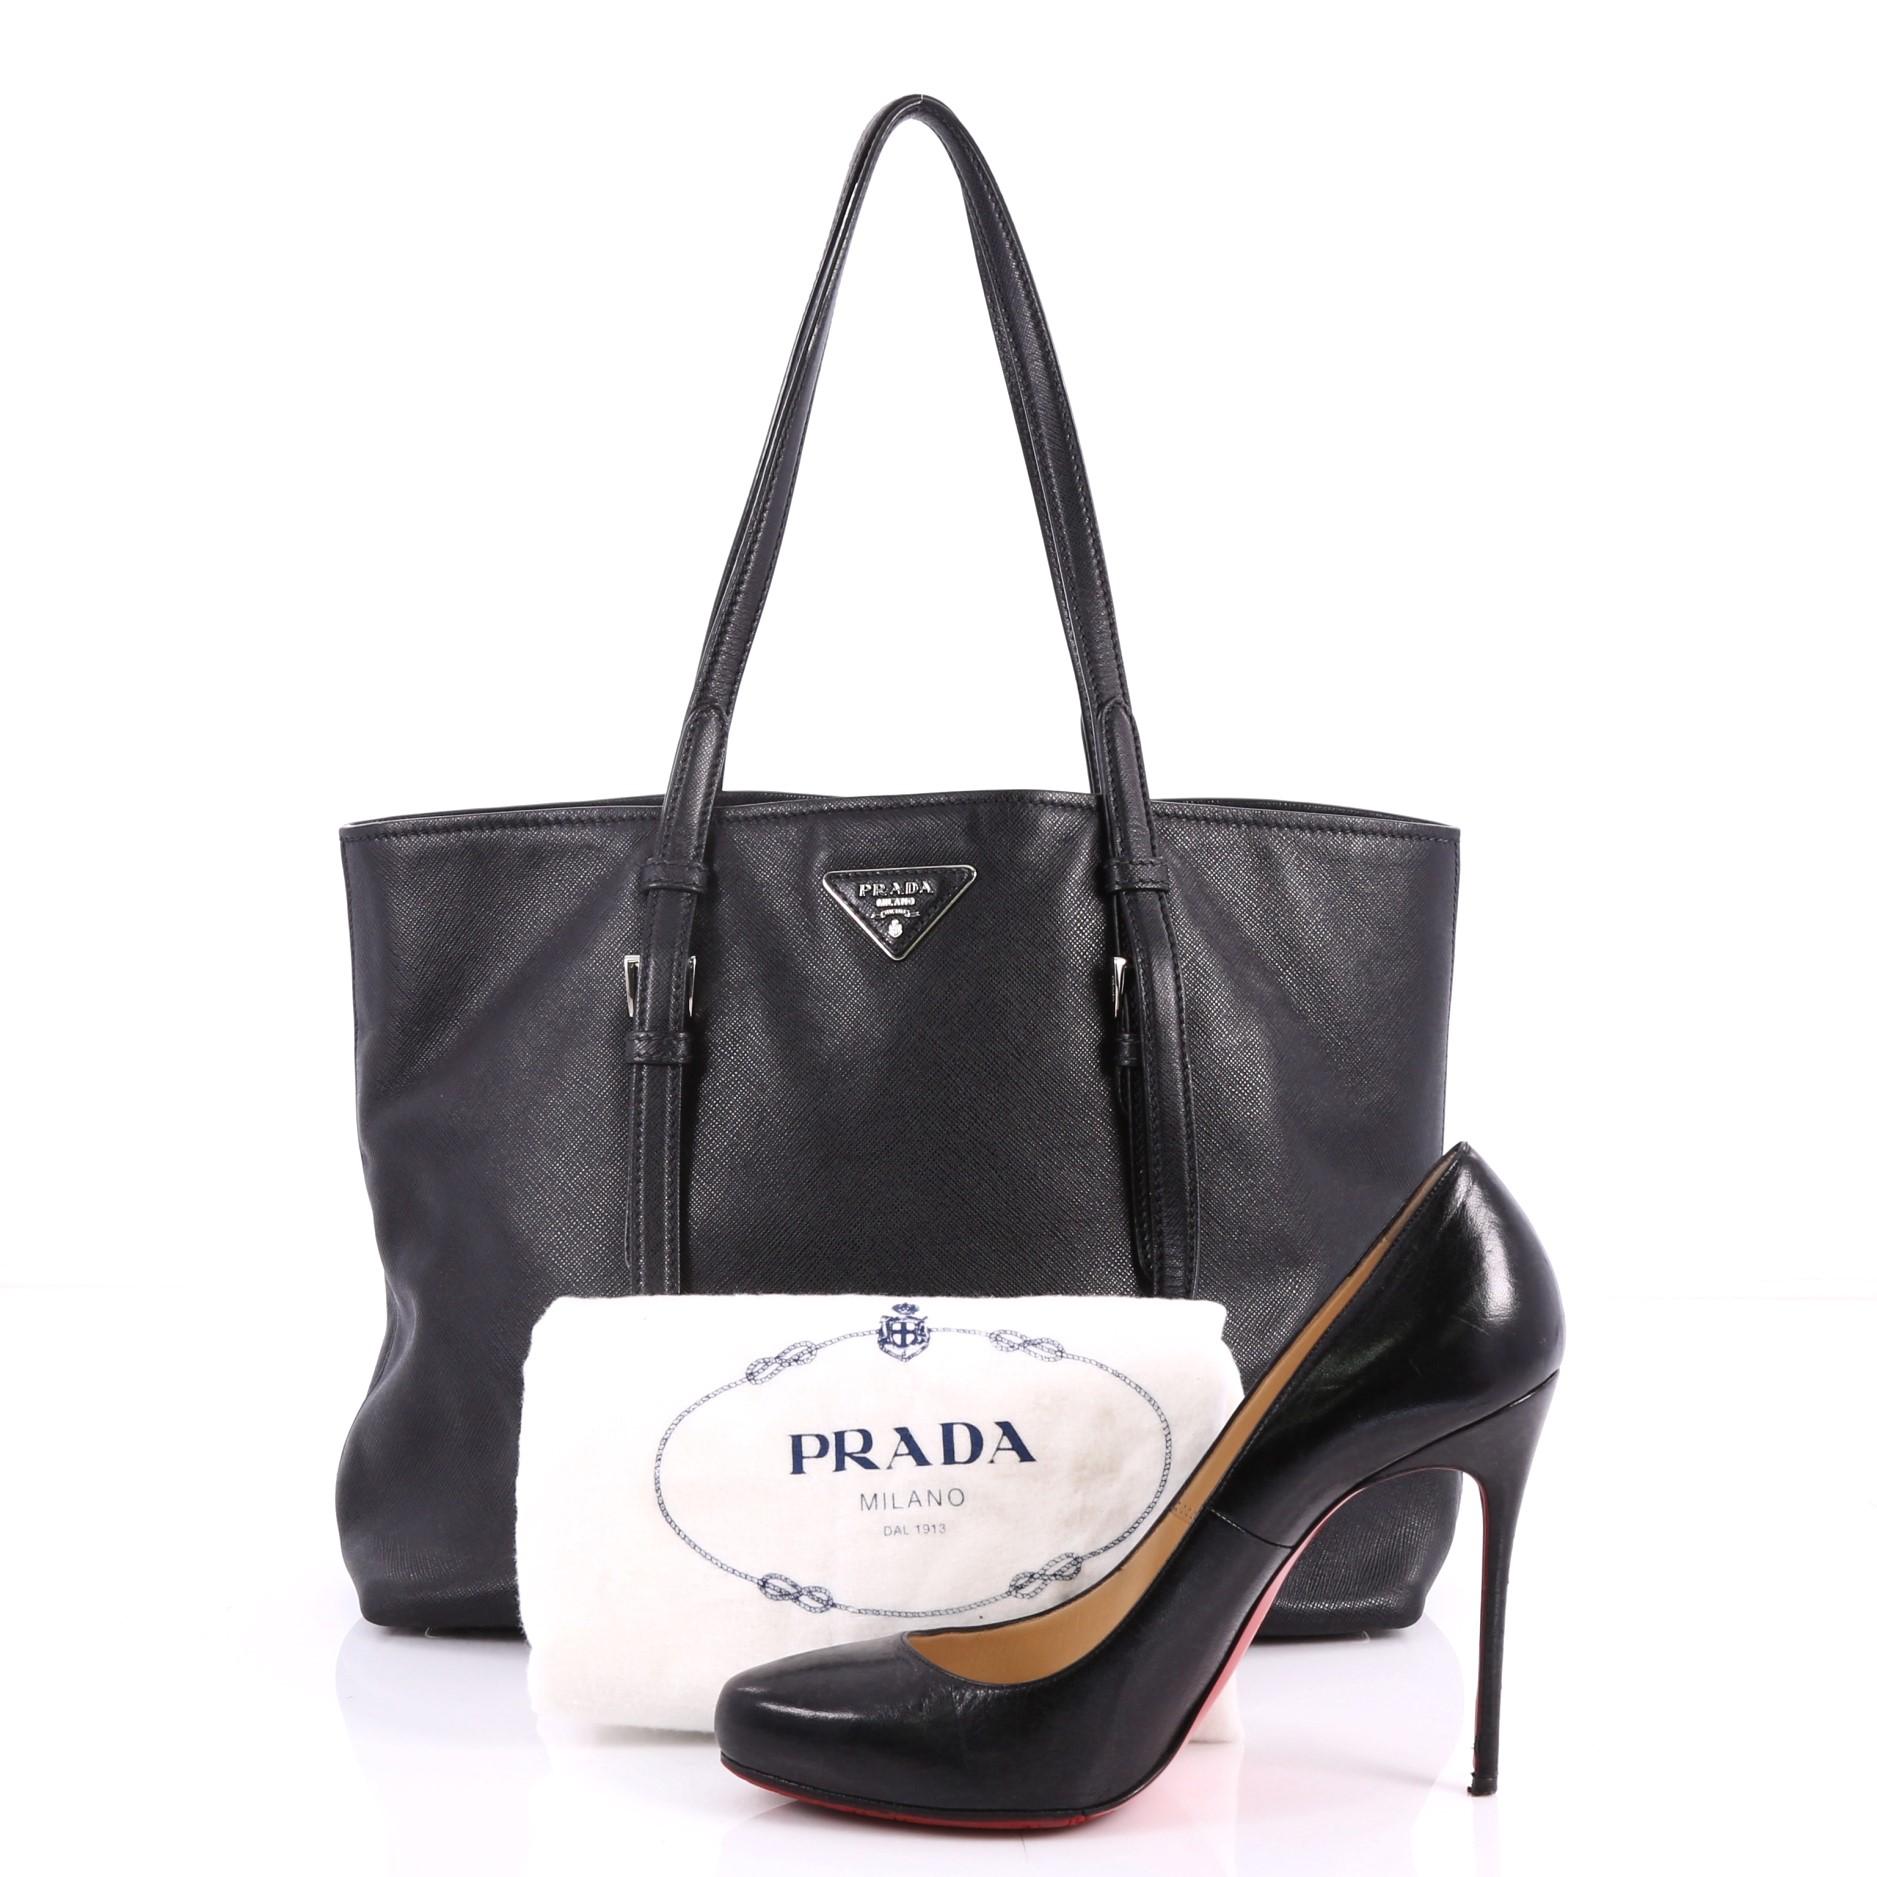 This authentic Prada Belted Soft Tote Saffiano Leather Medium is elegant in its simplicity and structure. Crafted in black saffiano leather, this stylish yet functional tote features dual slim leather handles with belt and buckle details, protective